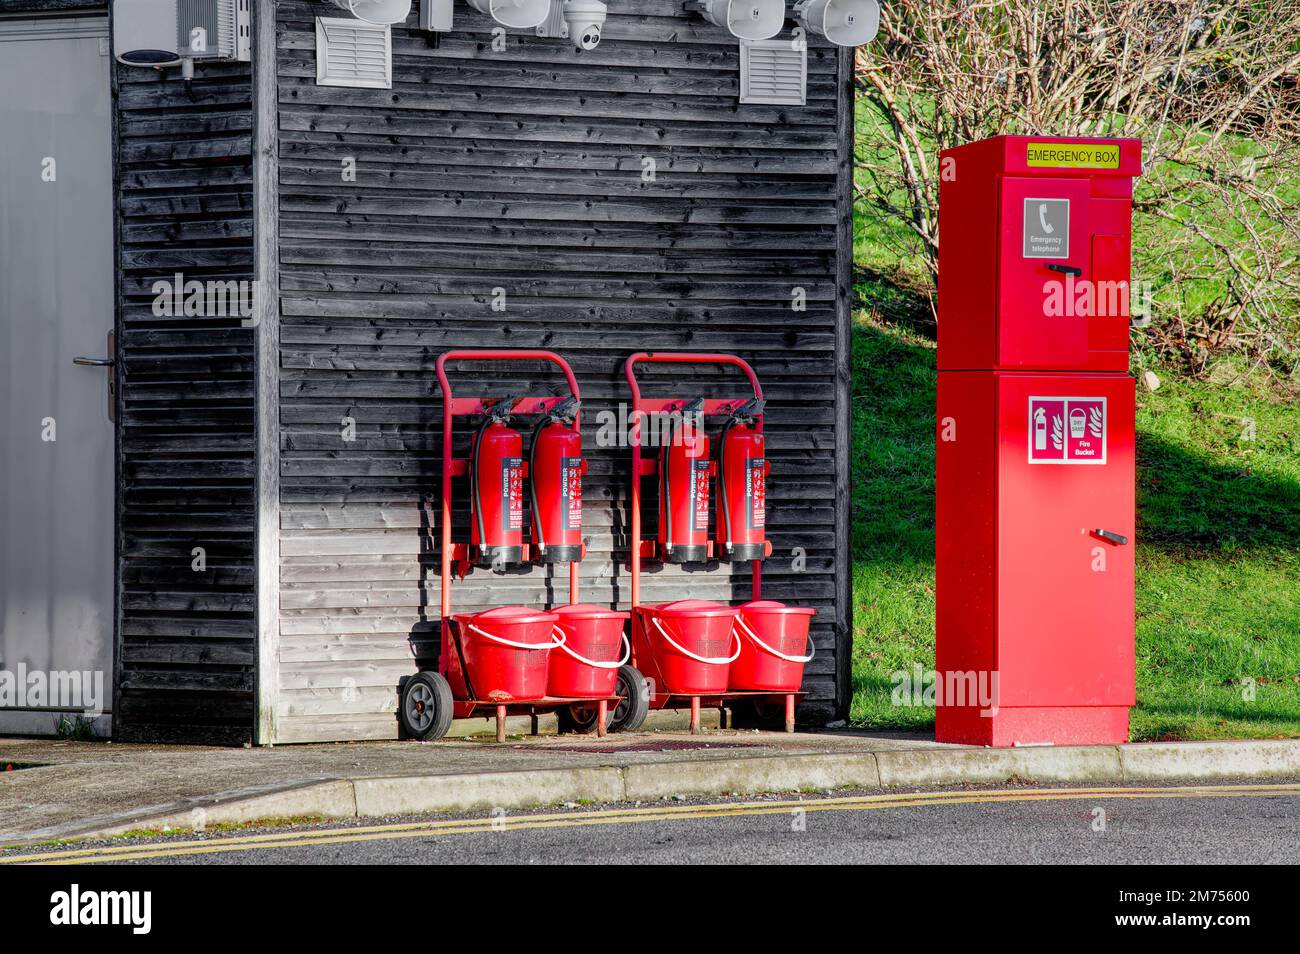 Powder fire extinguisher and red fire buckets for emergency use Stock Photo